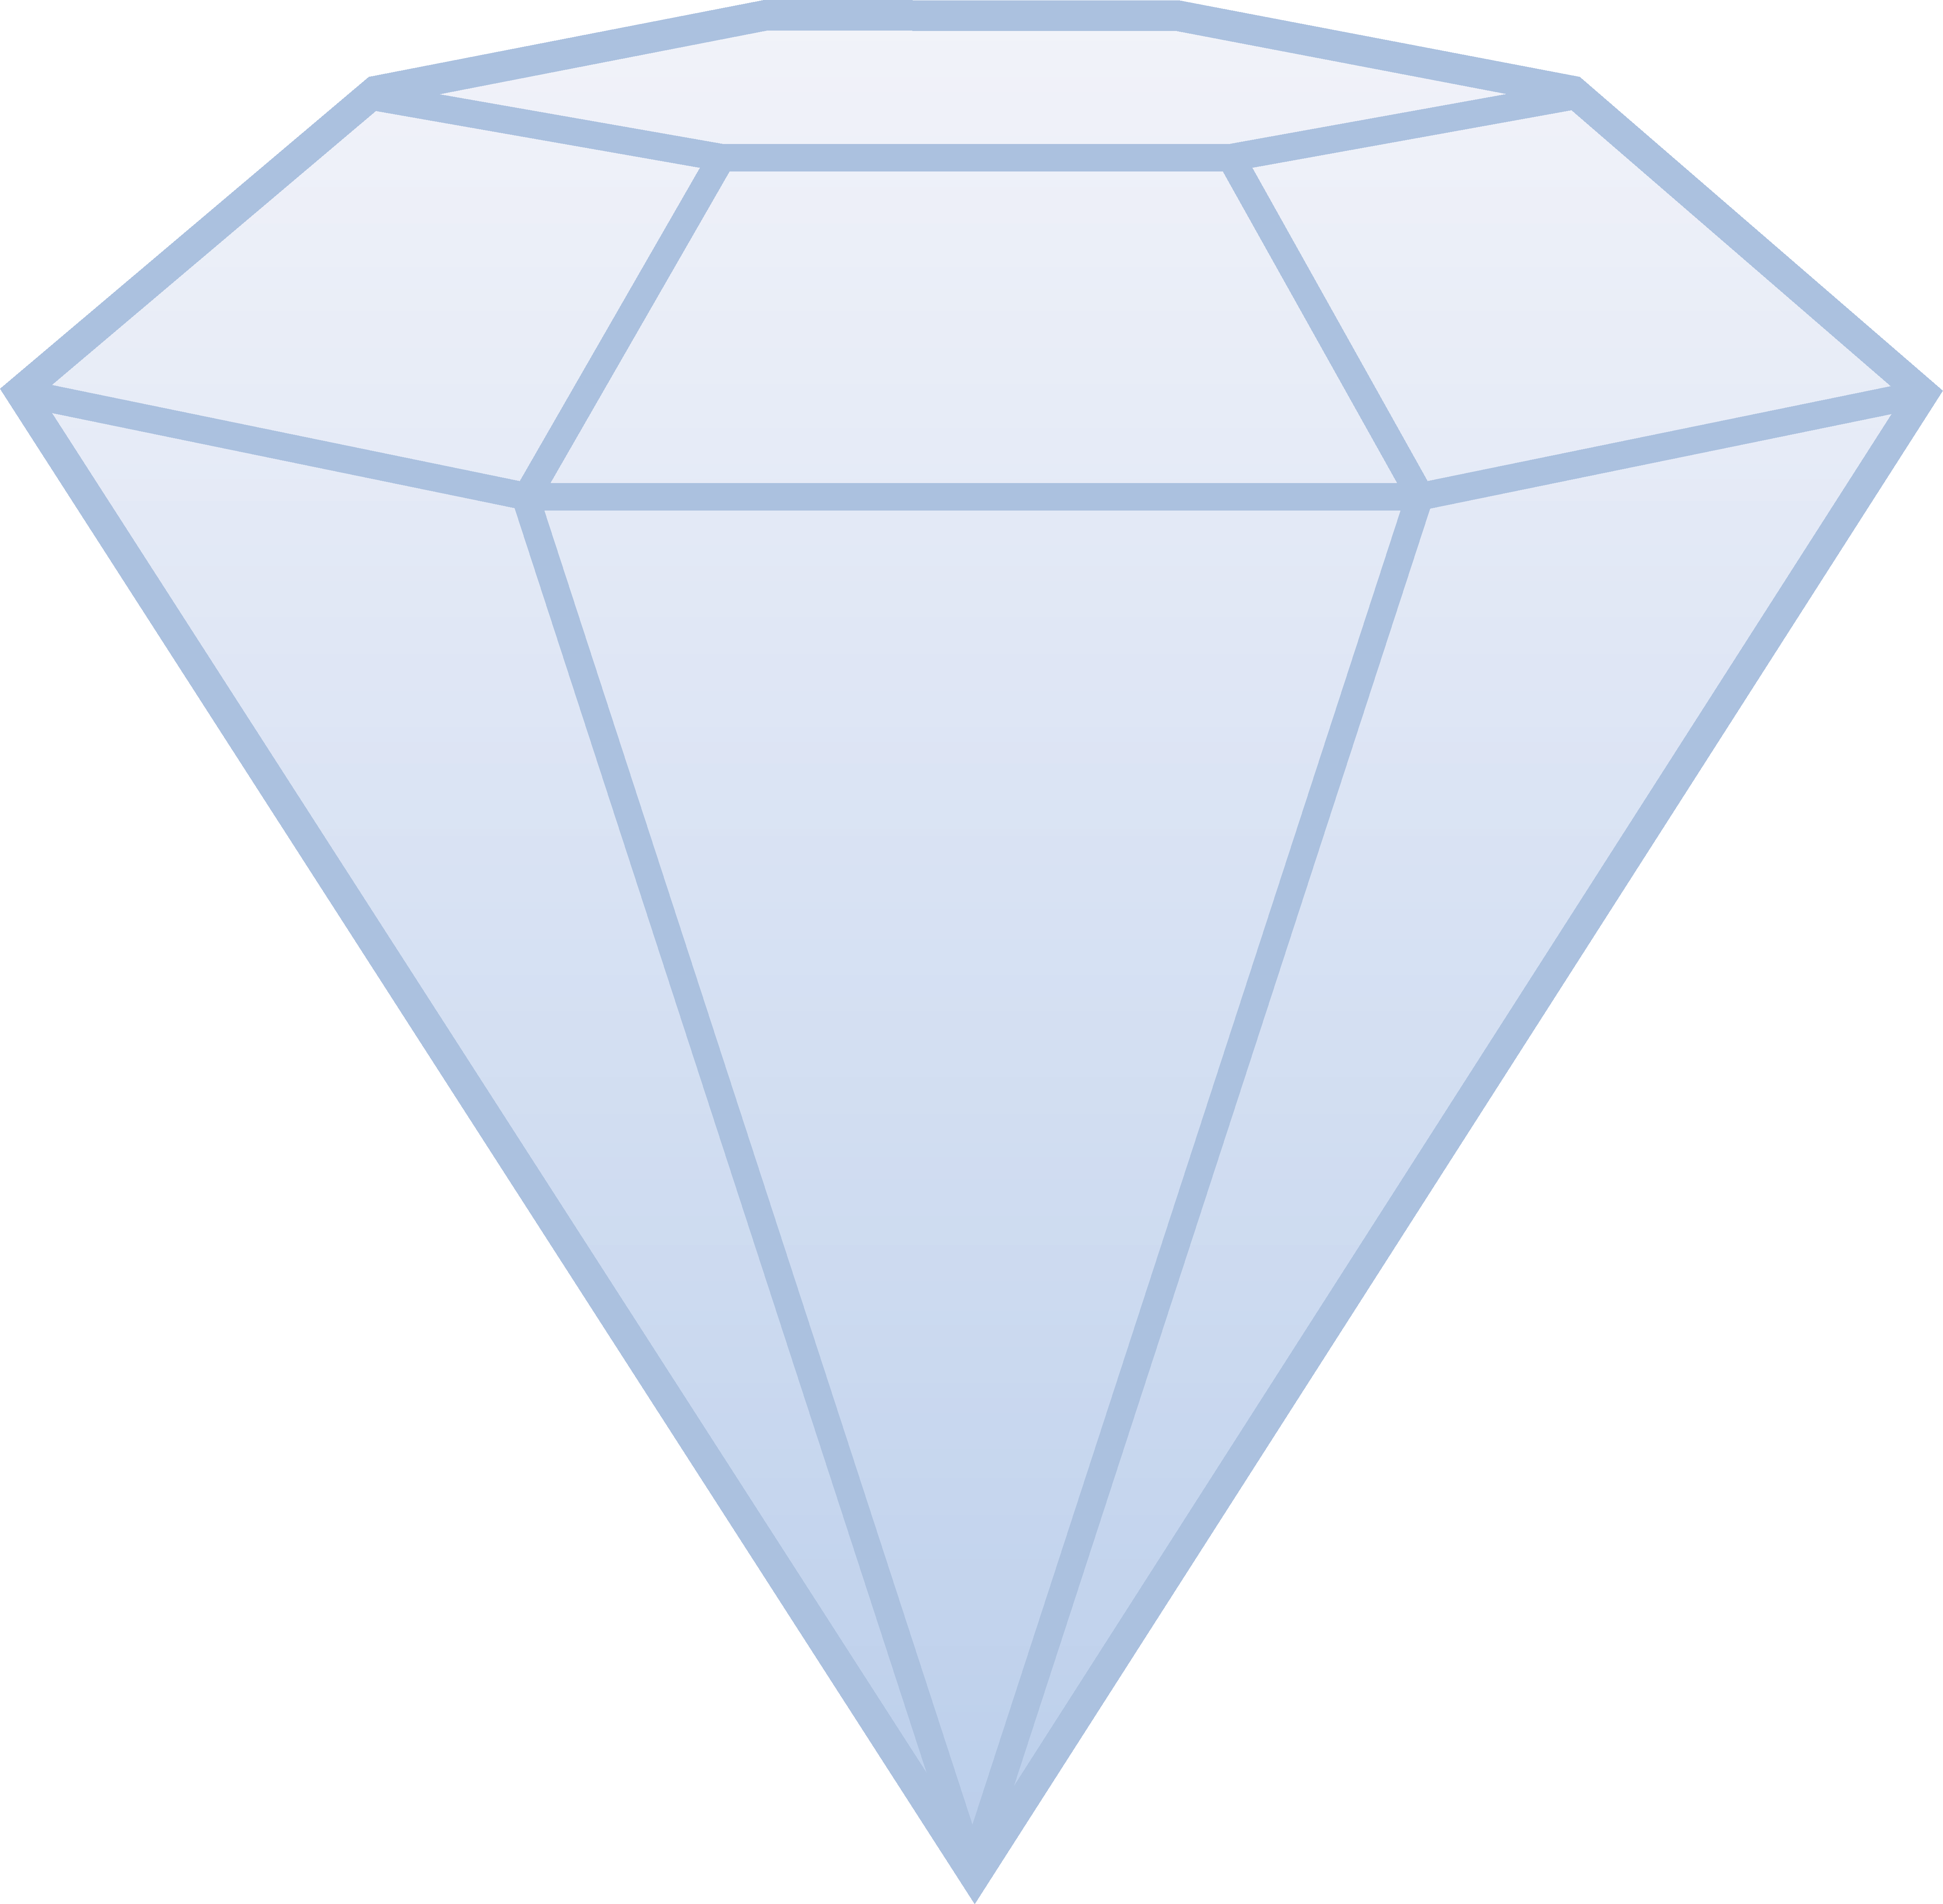 Diamond Design Free Download Png Clipart